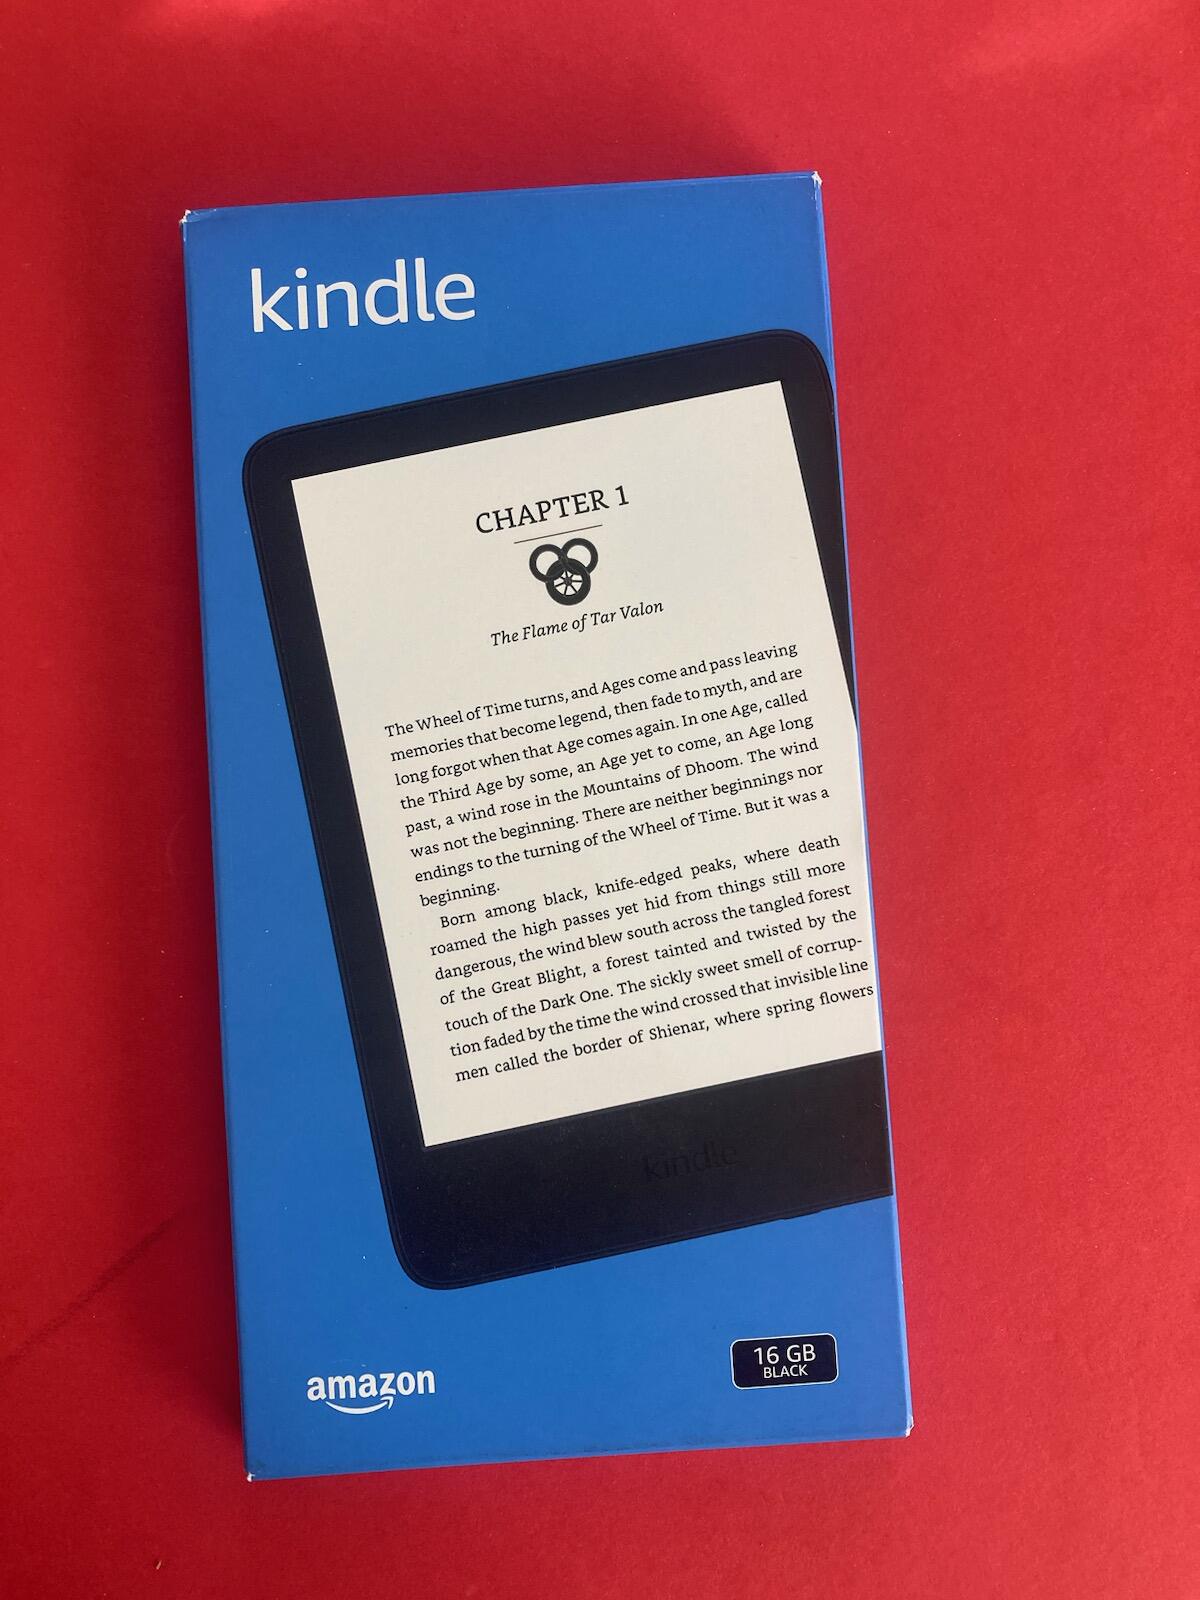 A raffle will be held of a copy of an Amazon Kindle.